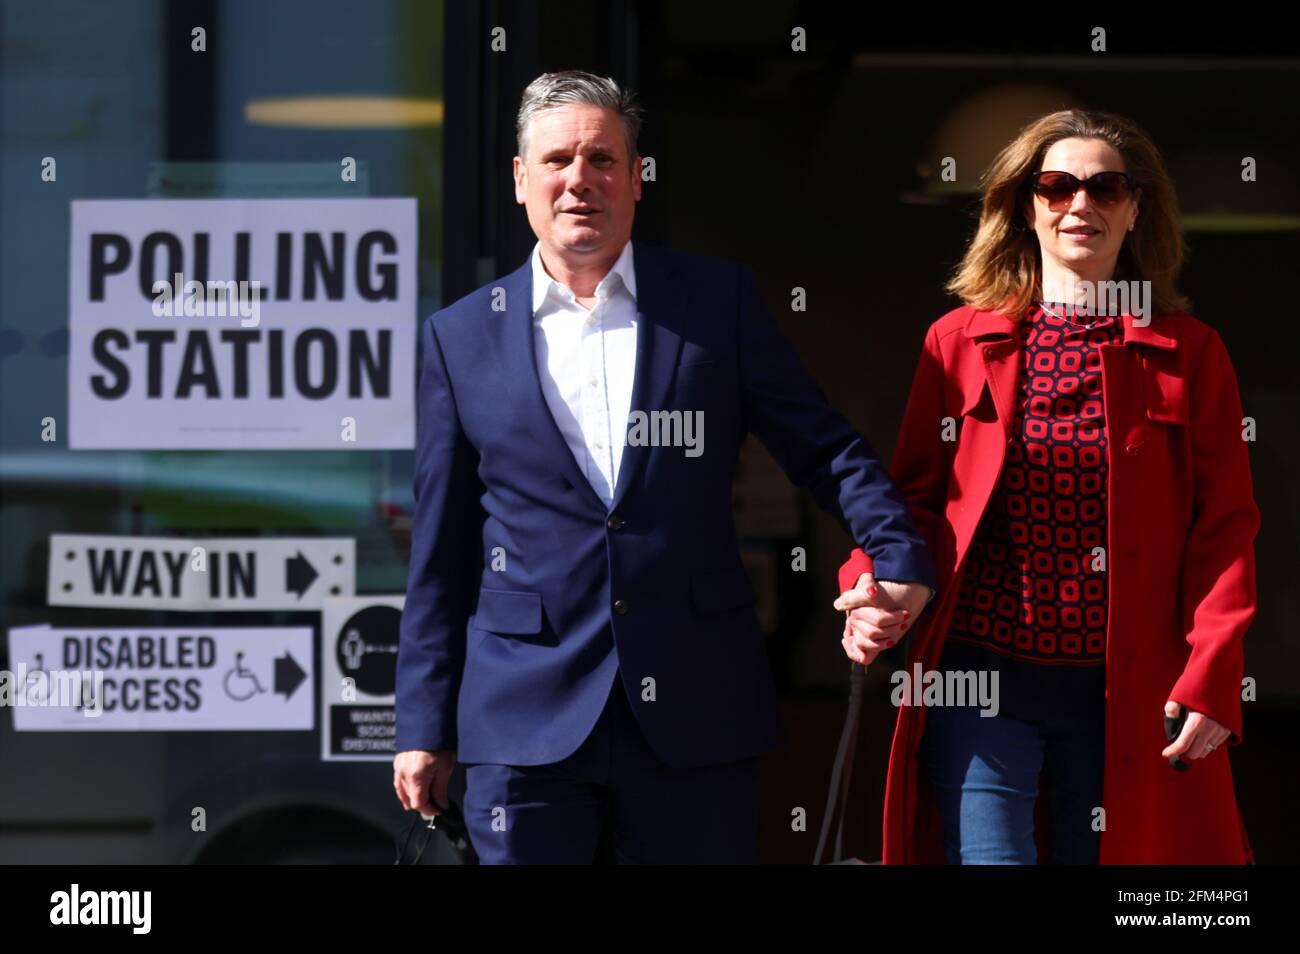 Britain's Labour Party leader Keir Starmer and his wife Victoria leave a polling station after casting a vote during local elections, in London, Britain May 6, 2021. REUTERS/Tom Nicholson Stock Photo